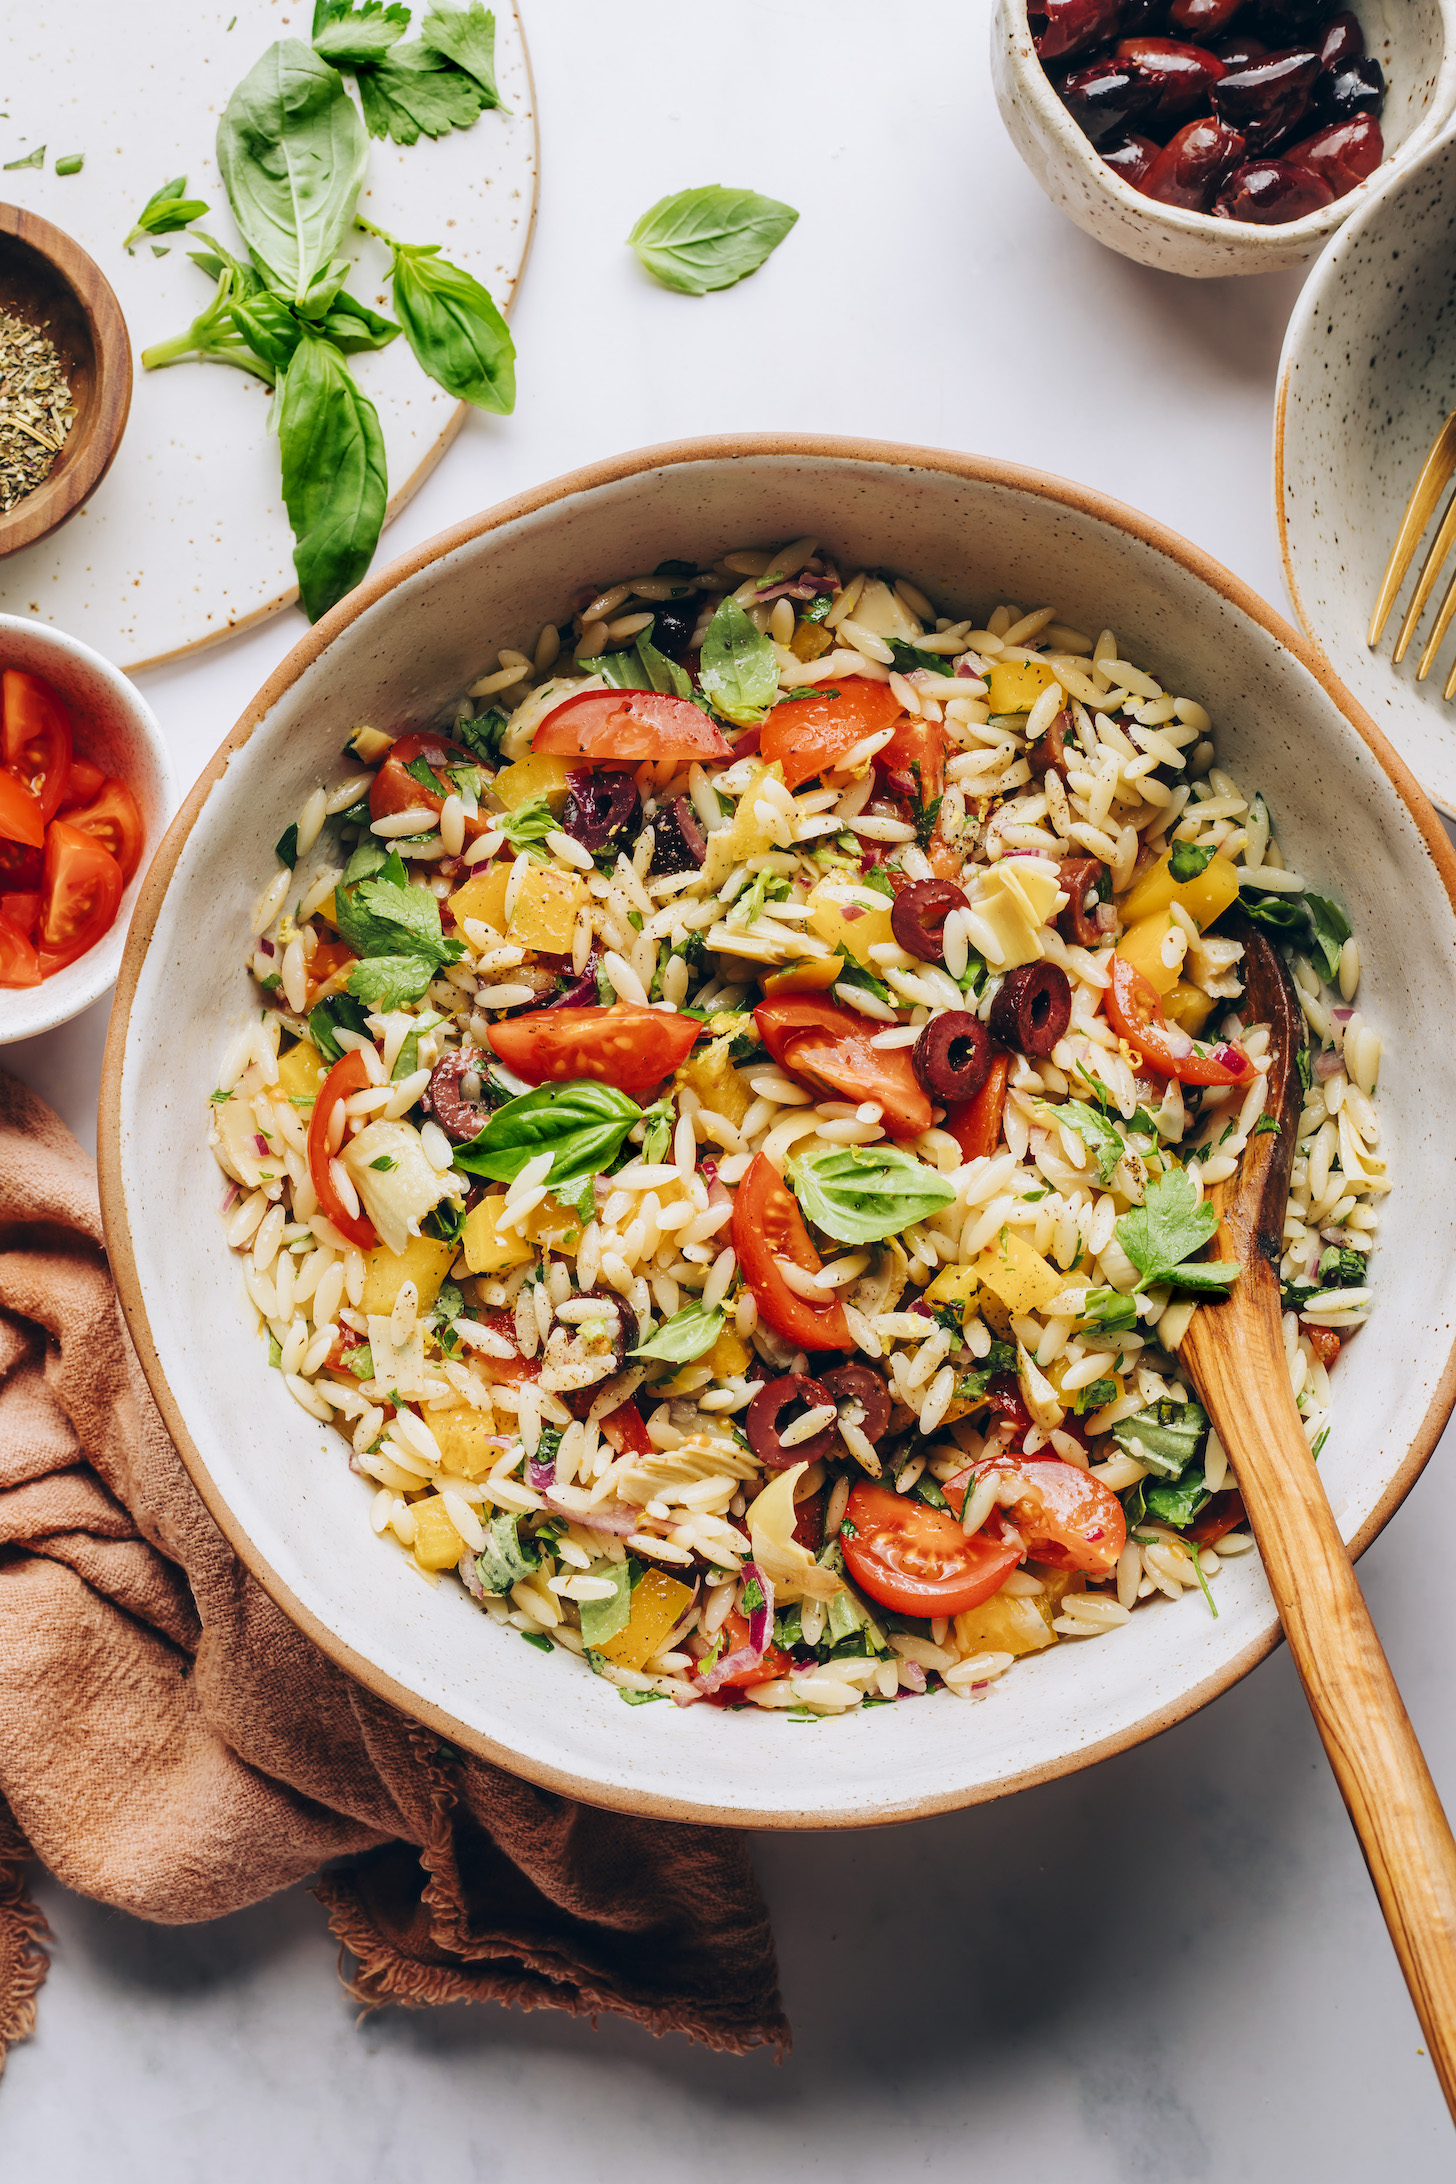 Large bowl filled with a vibrant Mediterranean-inspired orzo salad